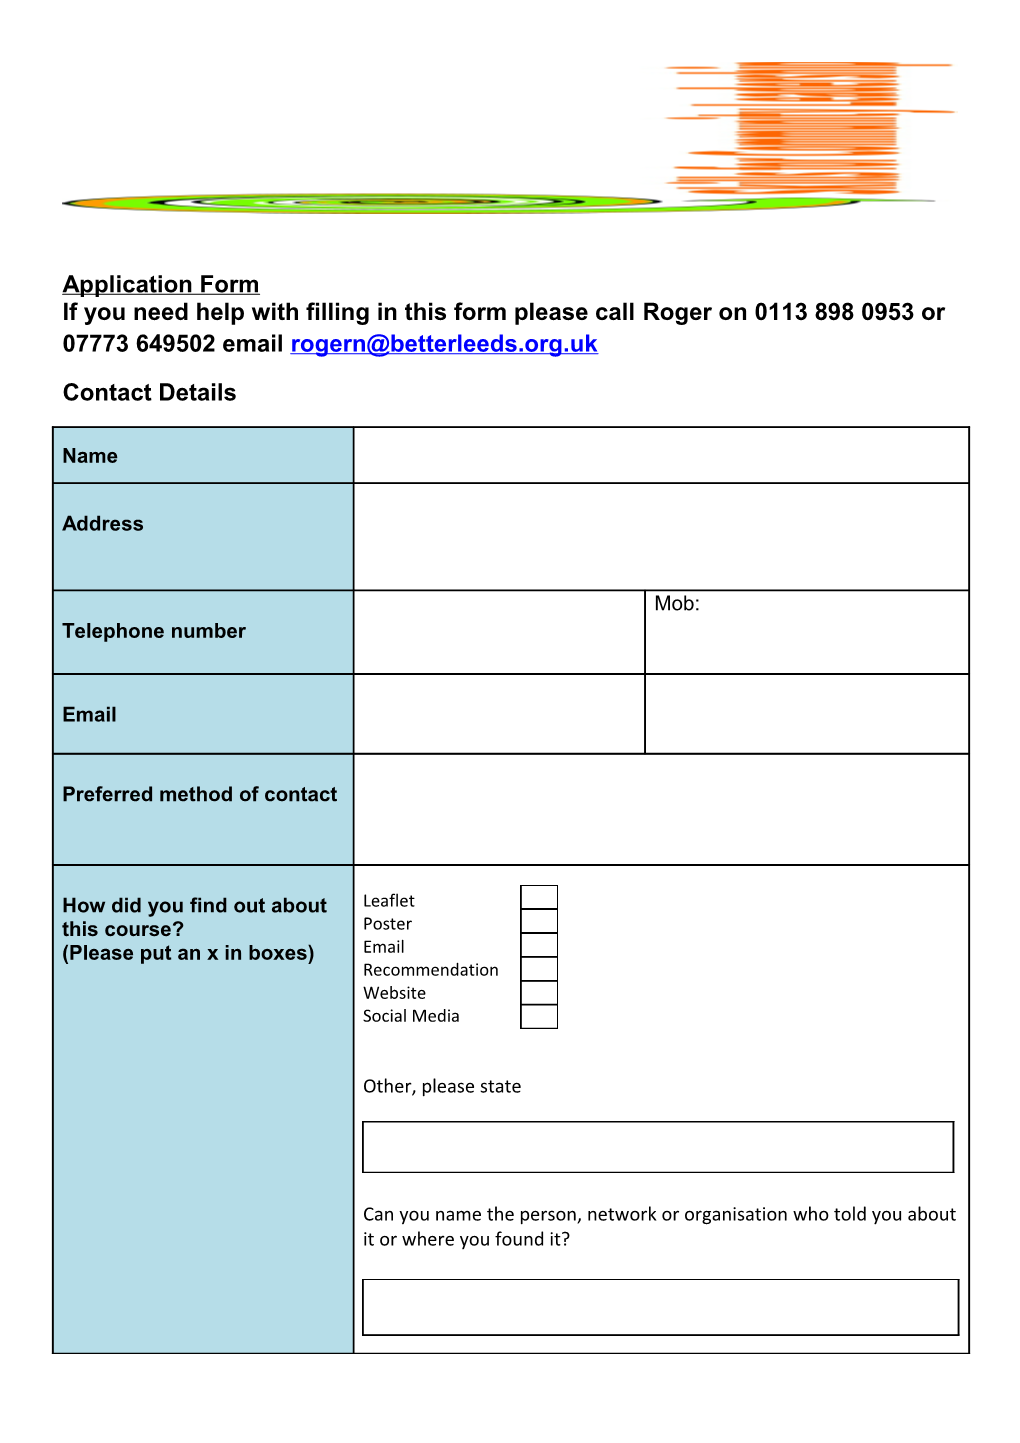 If You Need Help with Filling in This Form Please Call Roger on 0113 898 0953 Or 07773